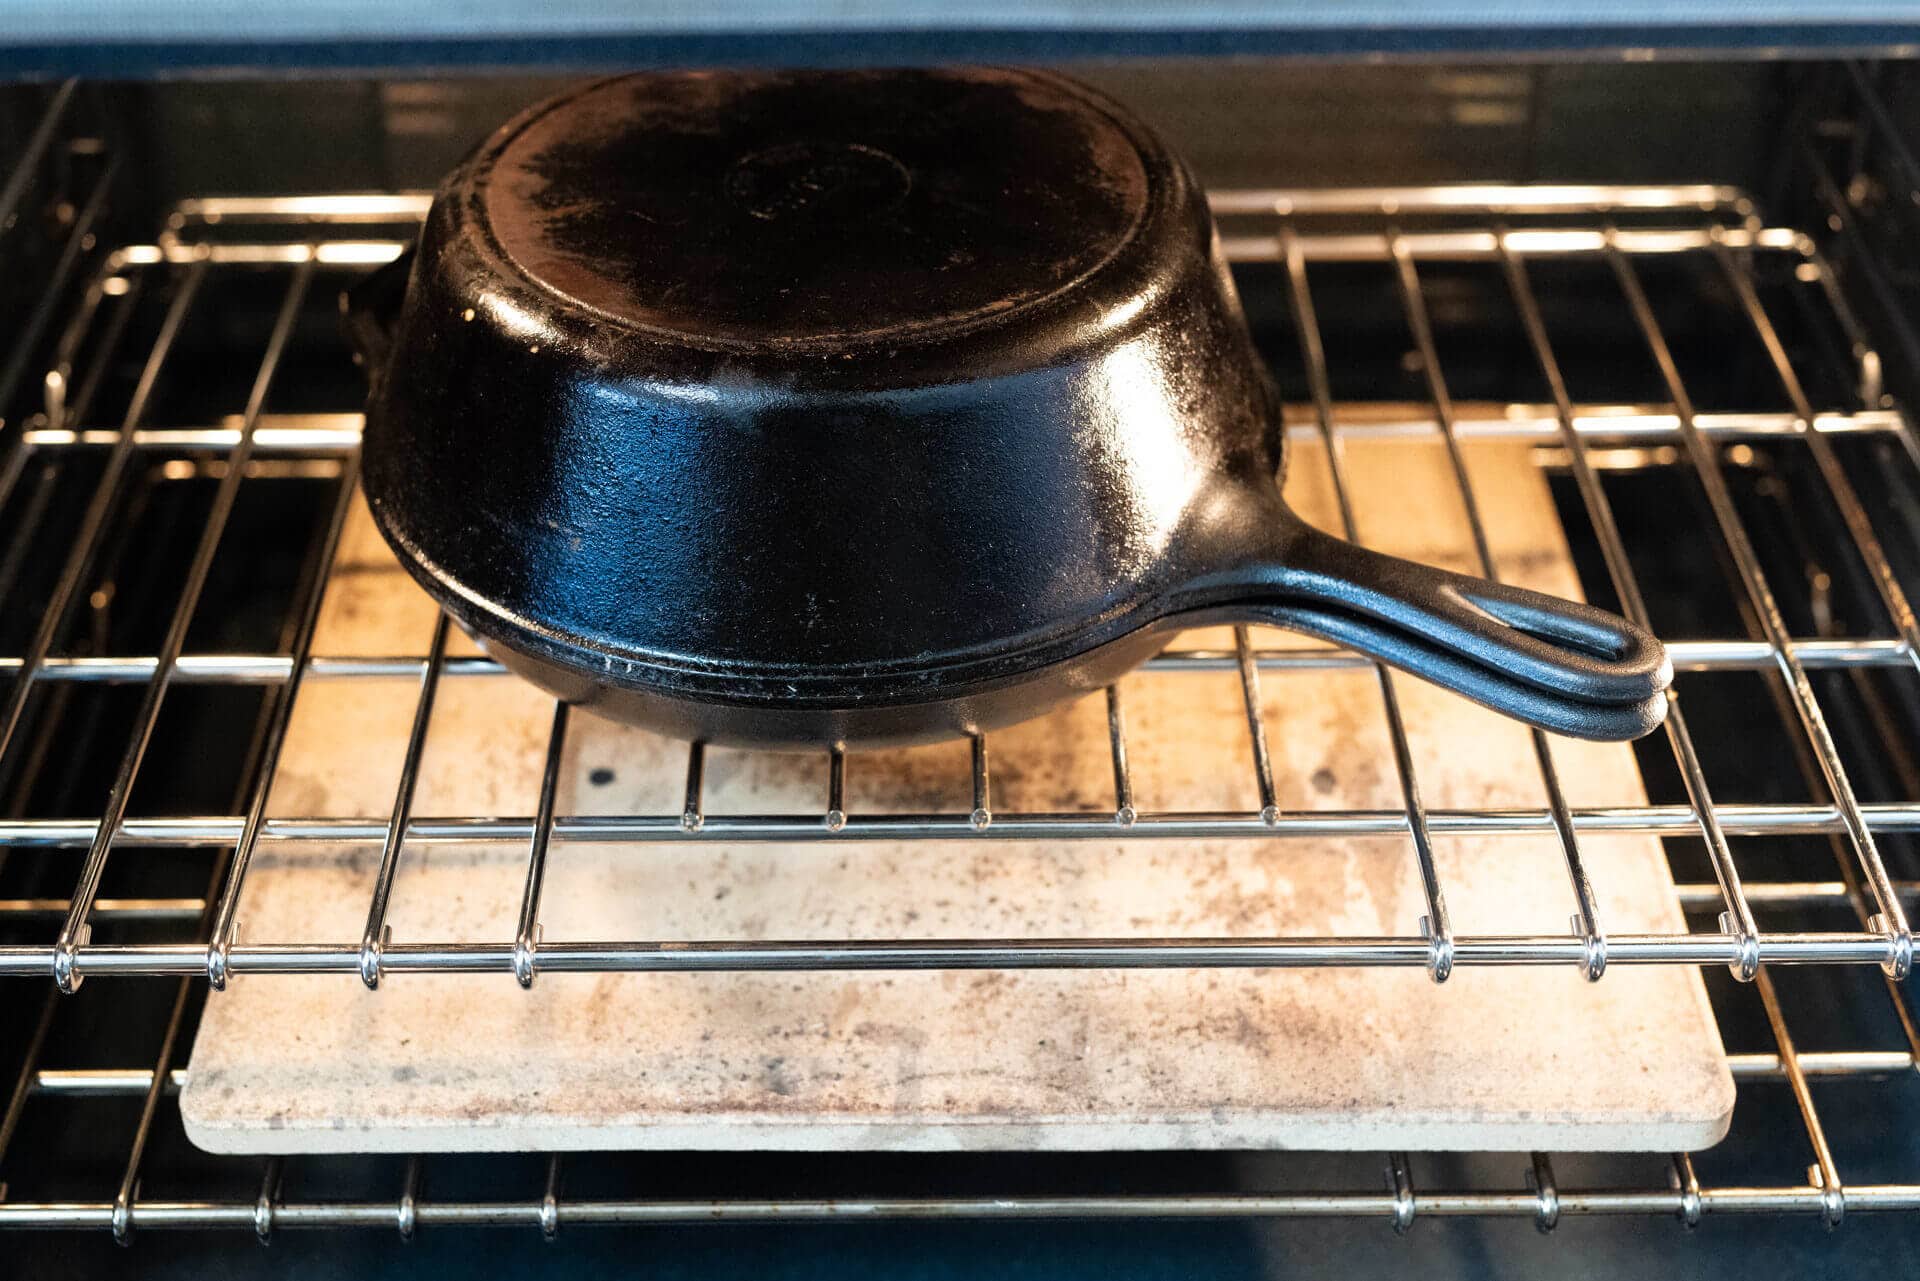 Prevent your bread from burning when baking in a Dutch oven by placing a baking sheet or baking stone below.